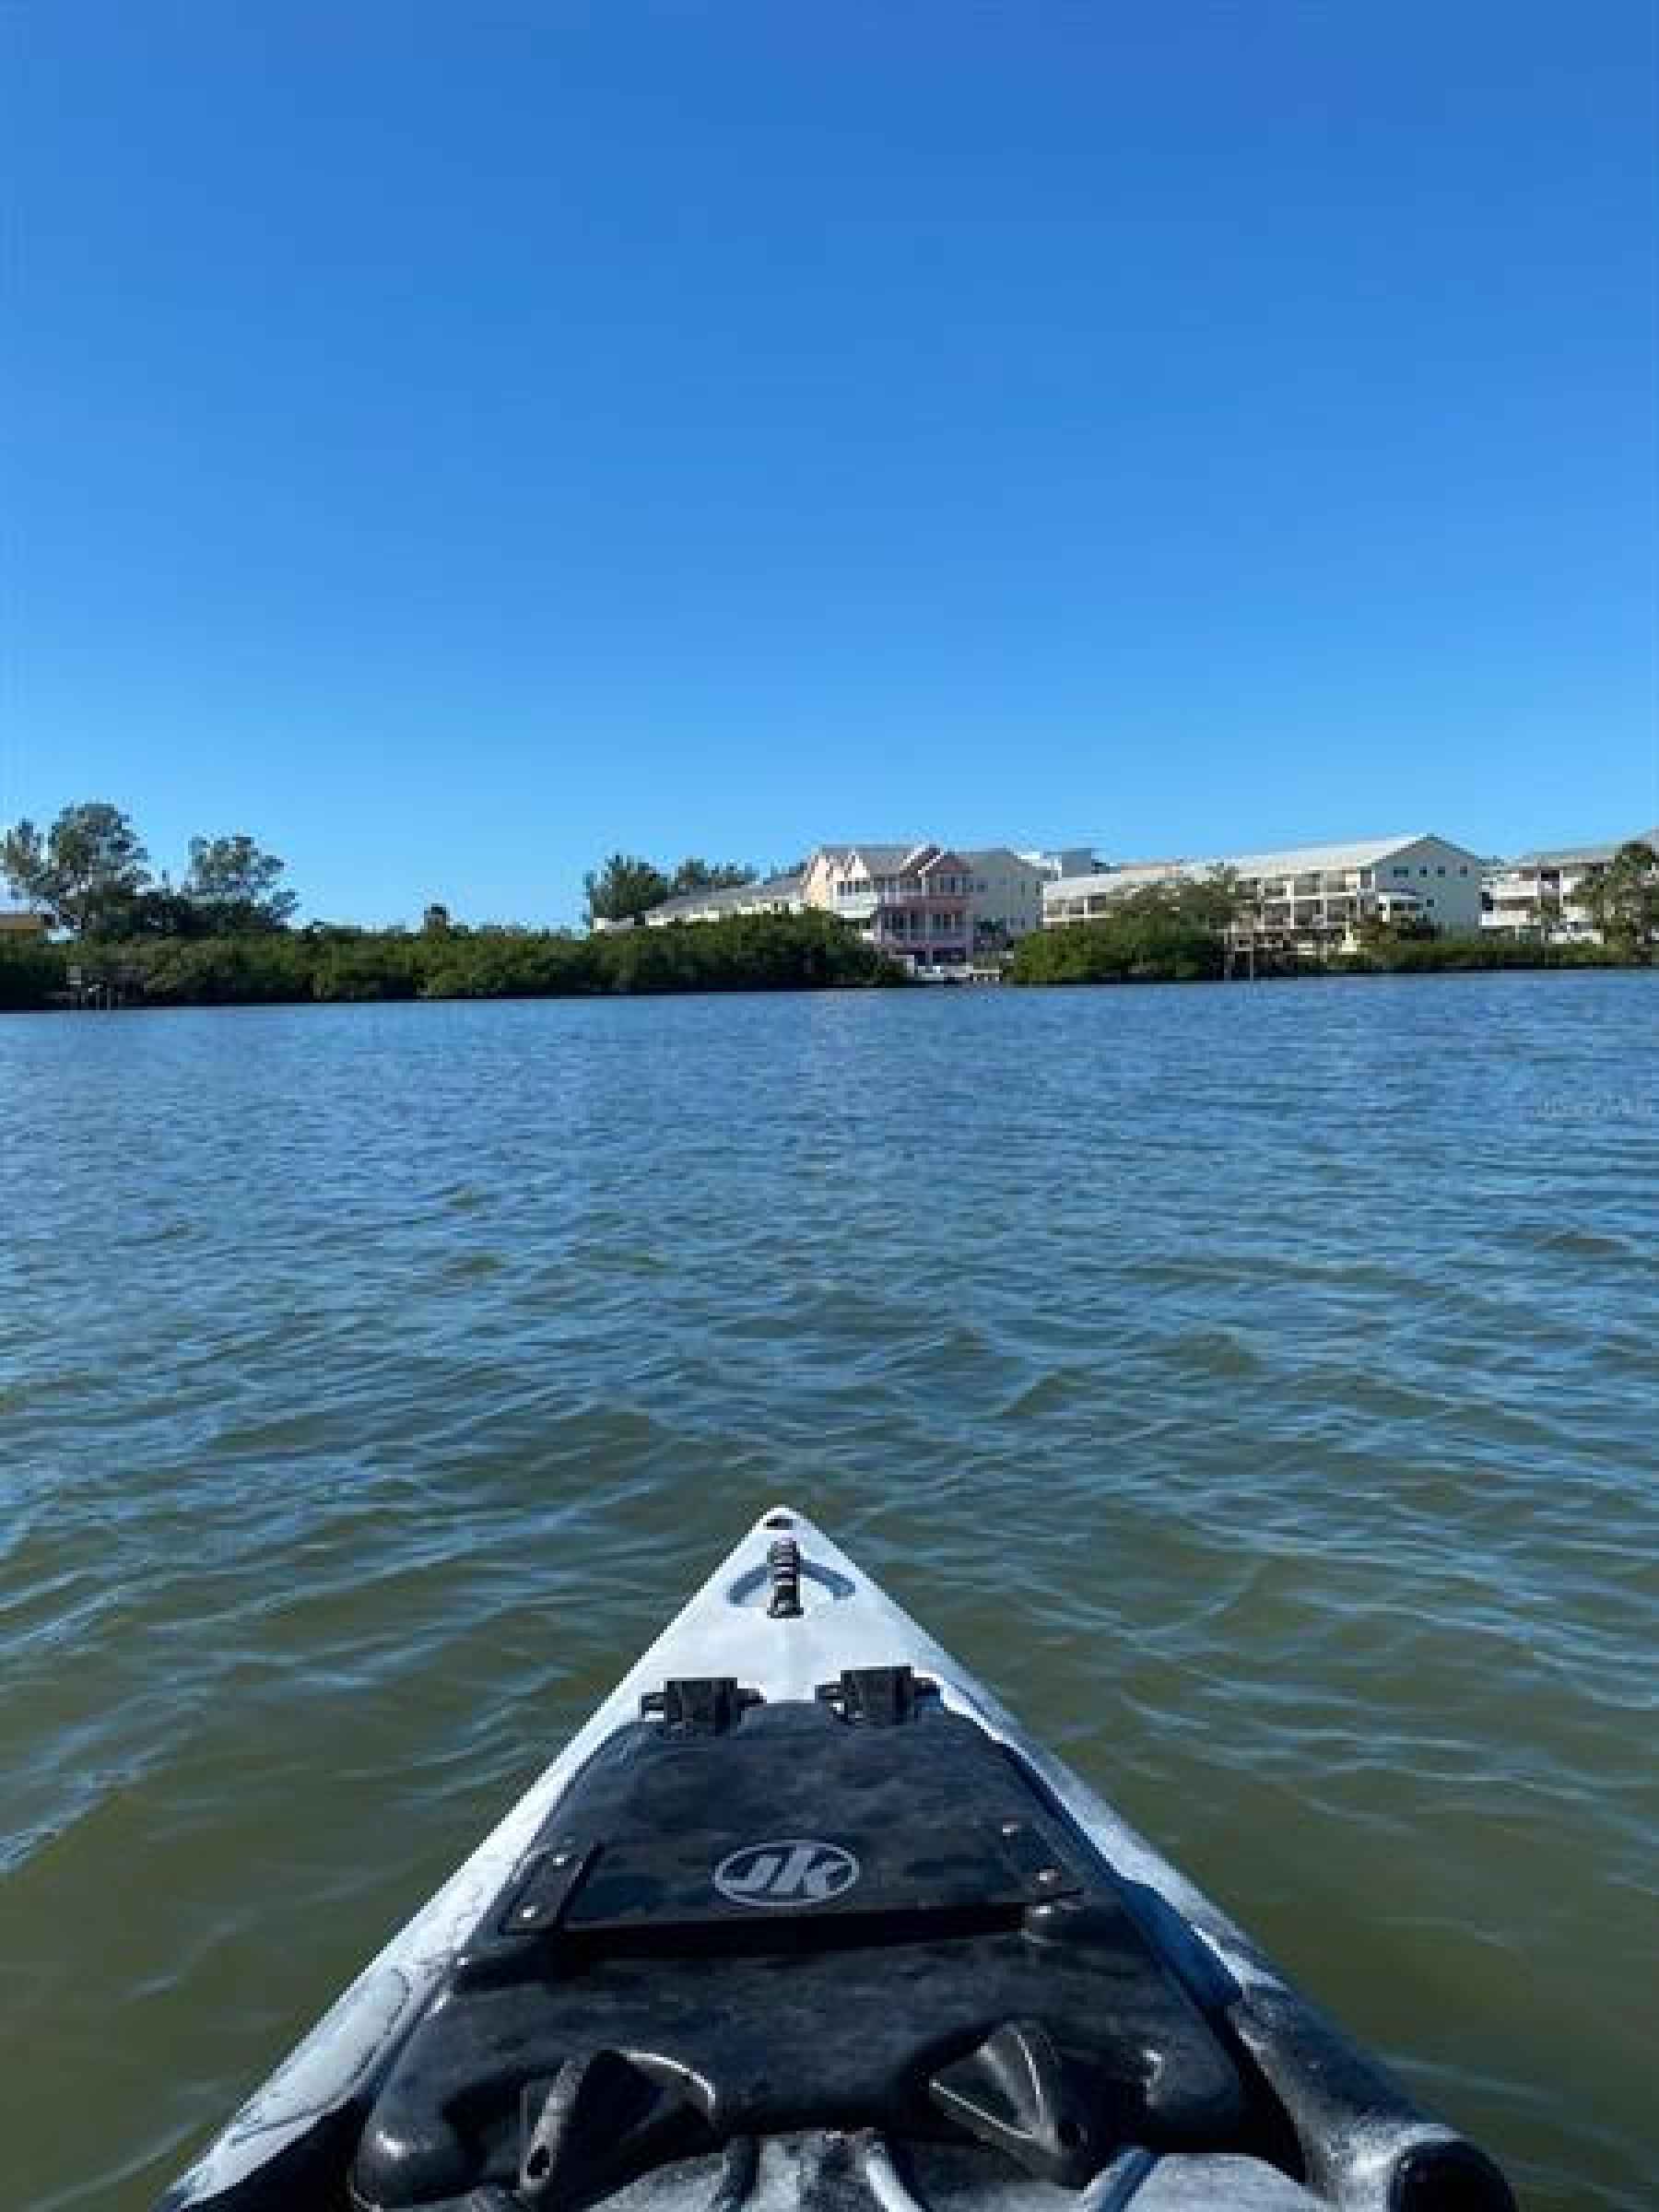 Public boat ramp in nearby Pinellas Parks - go kayaking/fishing